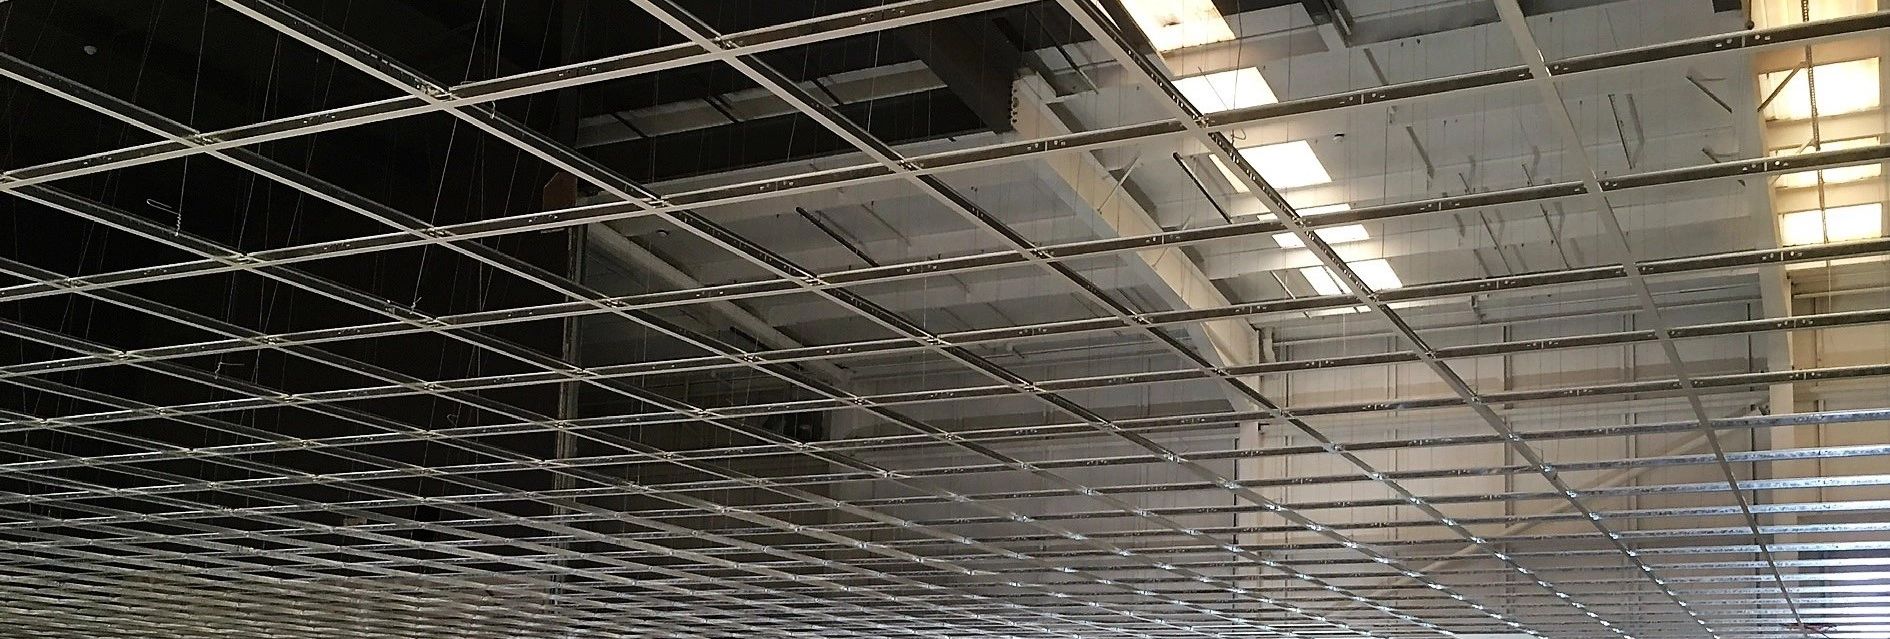 Suspended ceiling